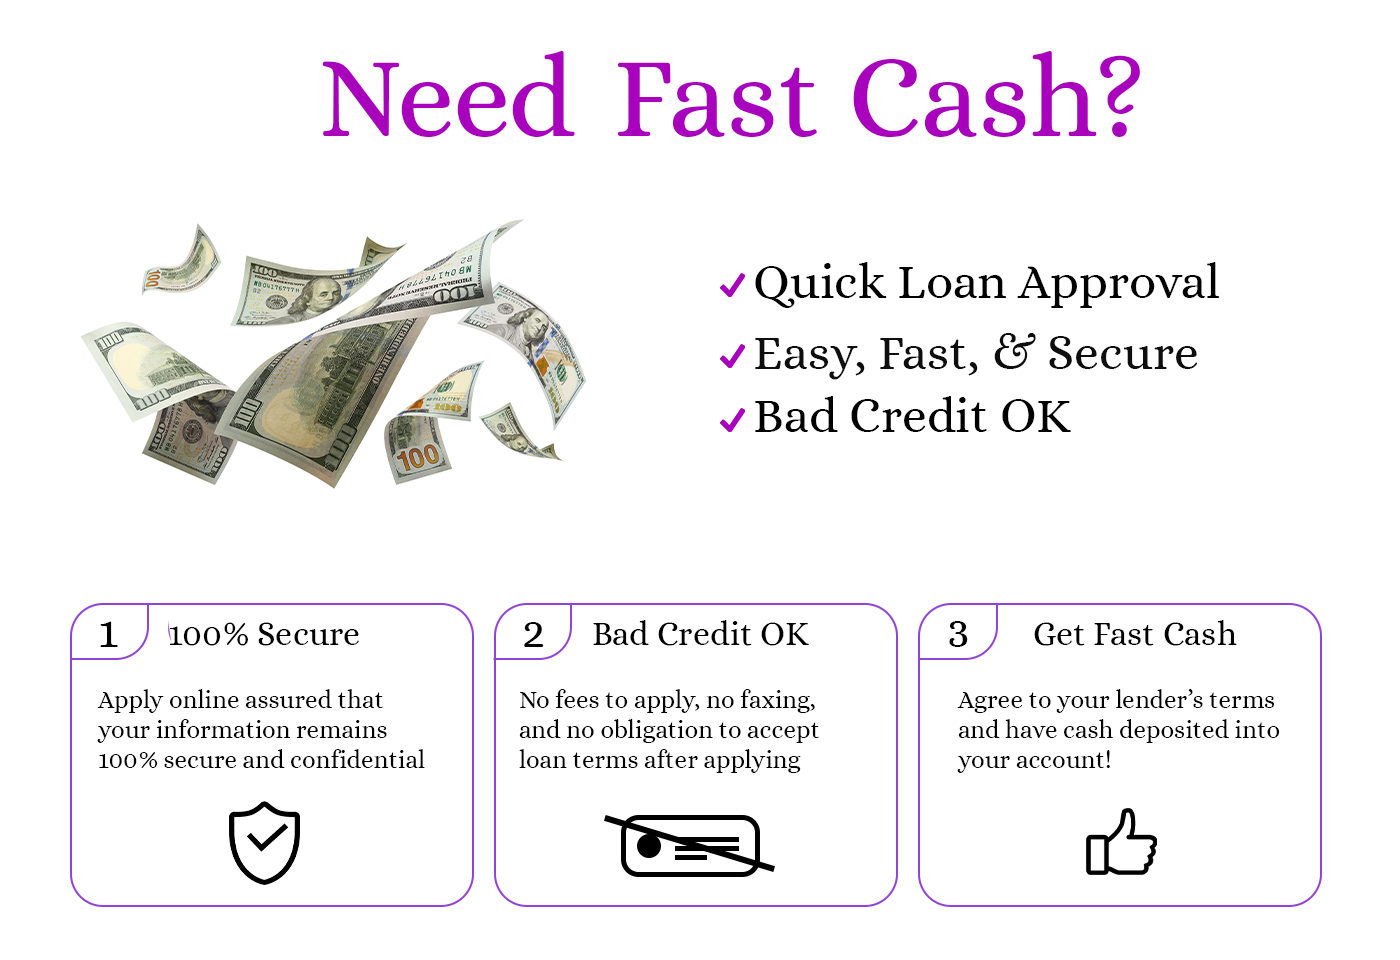 Advanategs of $200 Loans for Bad Credit Fast Approval